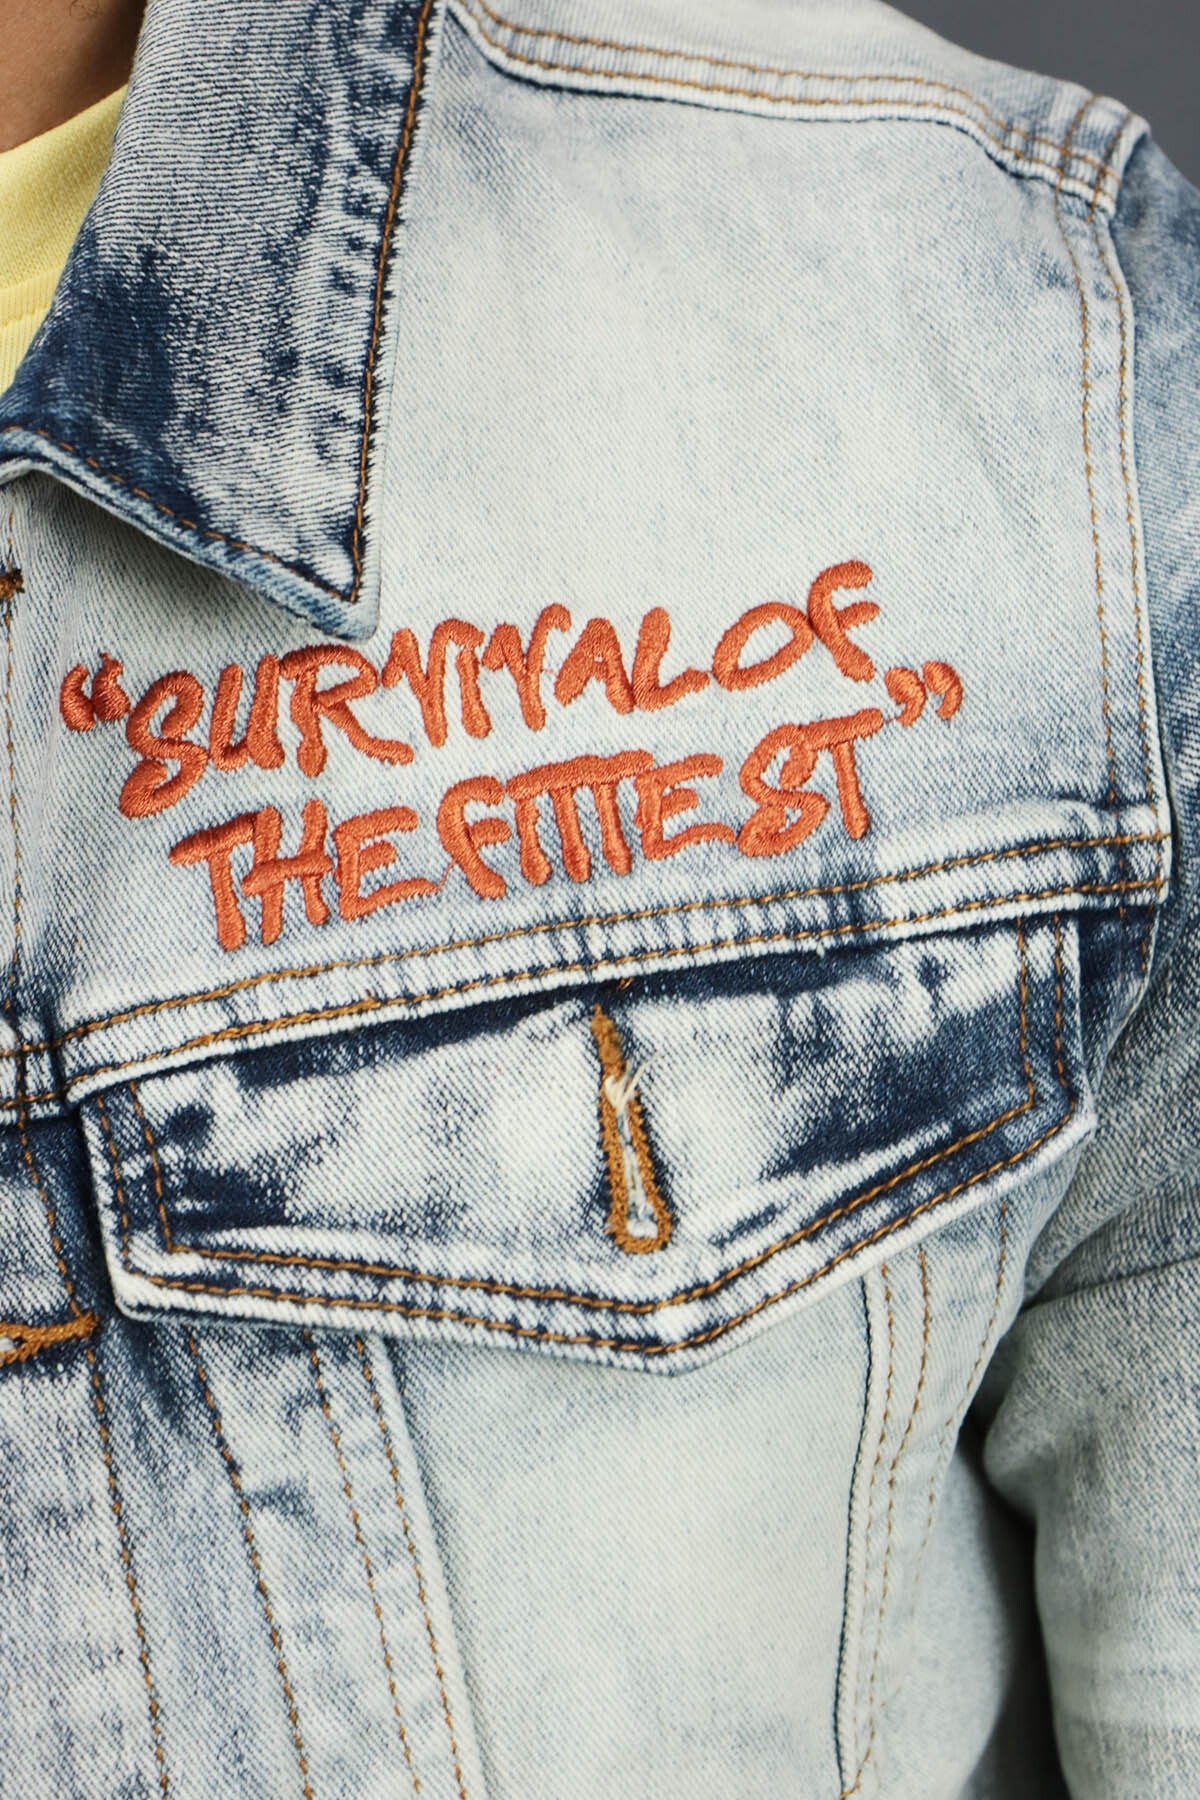 A close up of the Chest Embroidery on the Only The Strong Custom Spray Painted Denim Jacket Motive Denim | Vintage | 